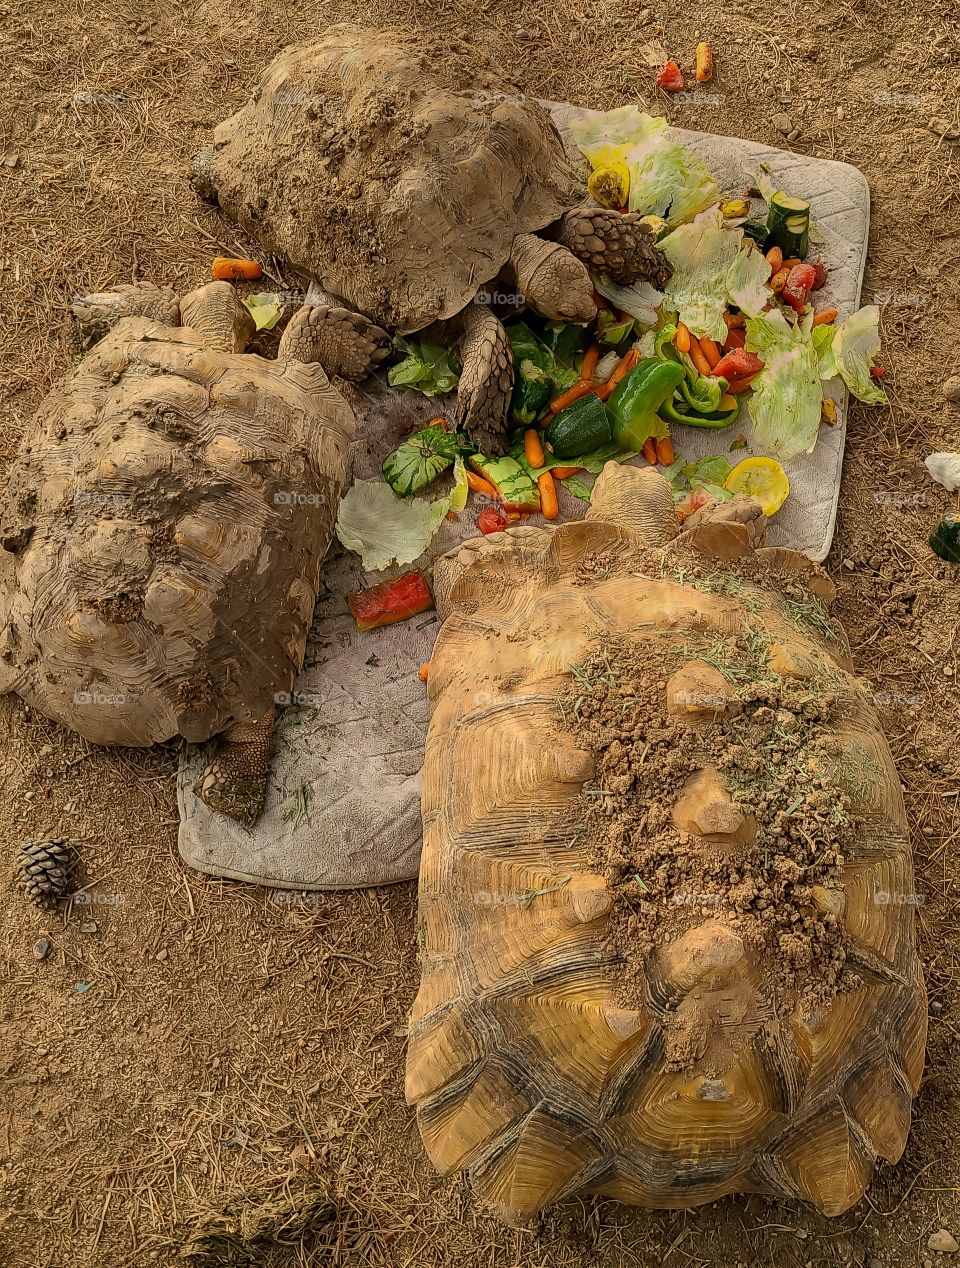 Large 13yo.Sulcata tortoise named Timmy and his two lady friends. having a leisurely lunch.